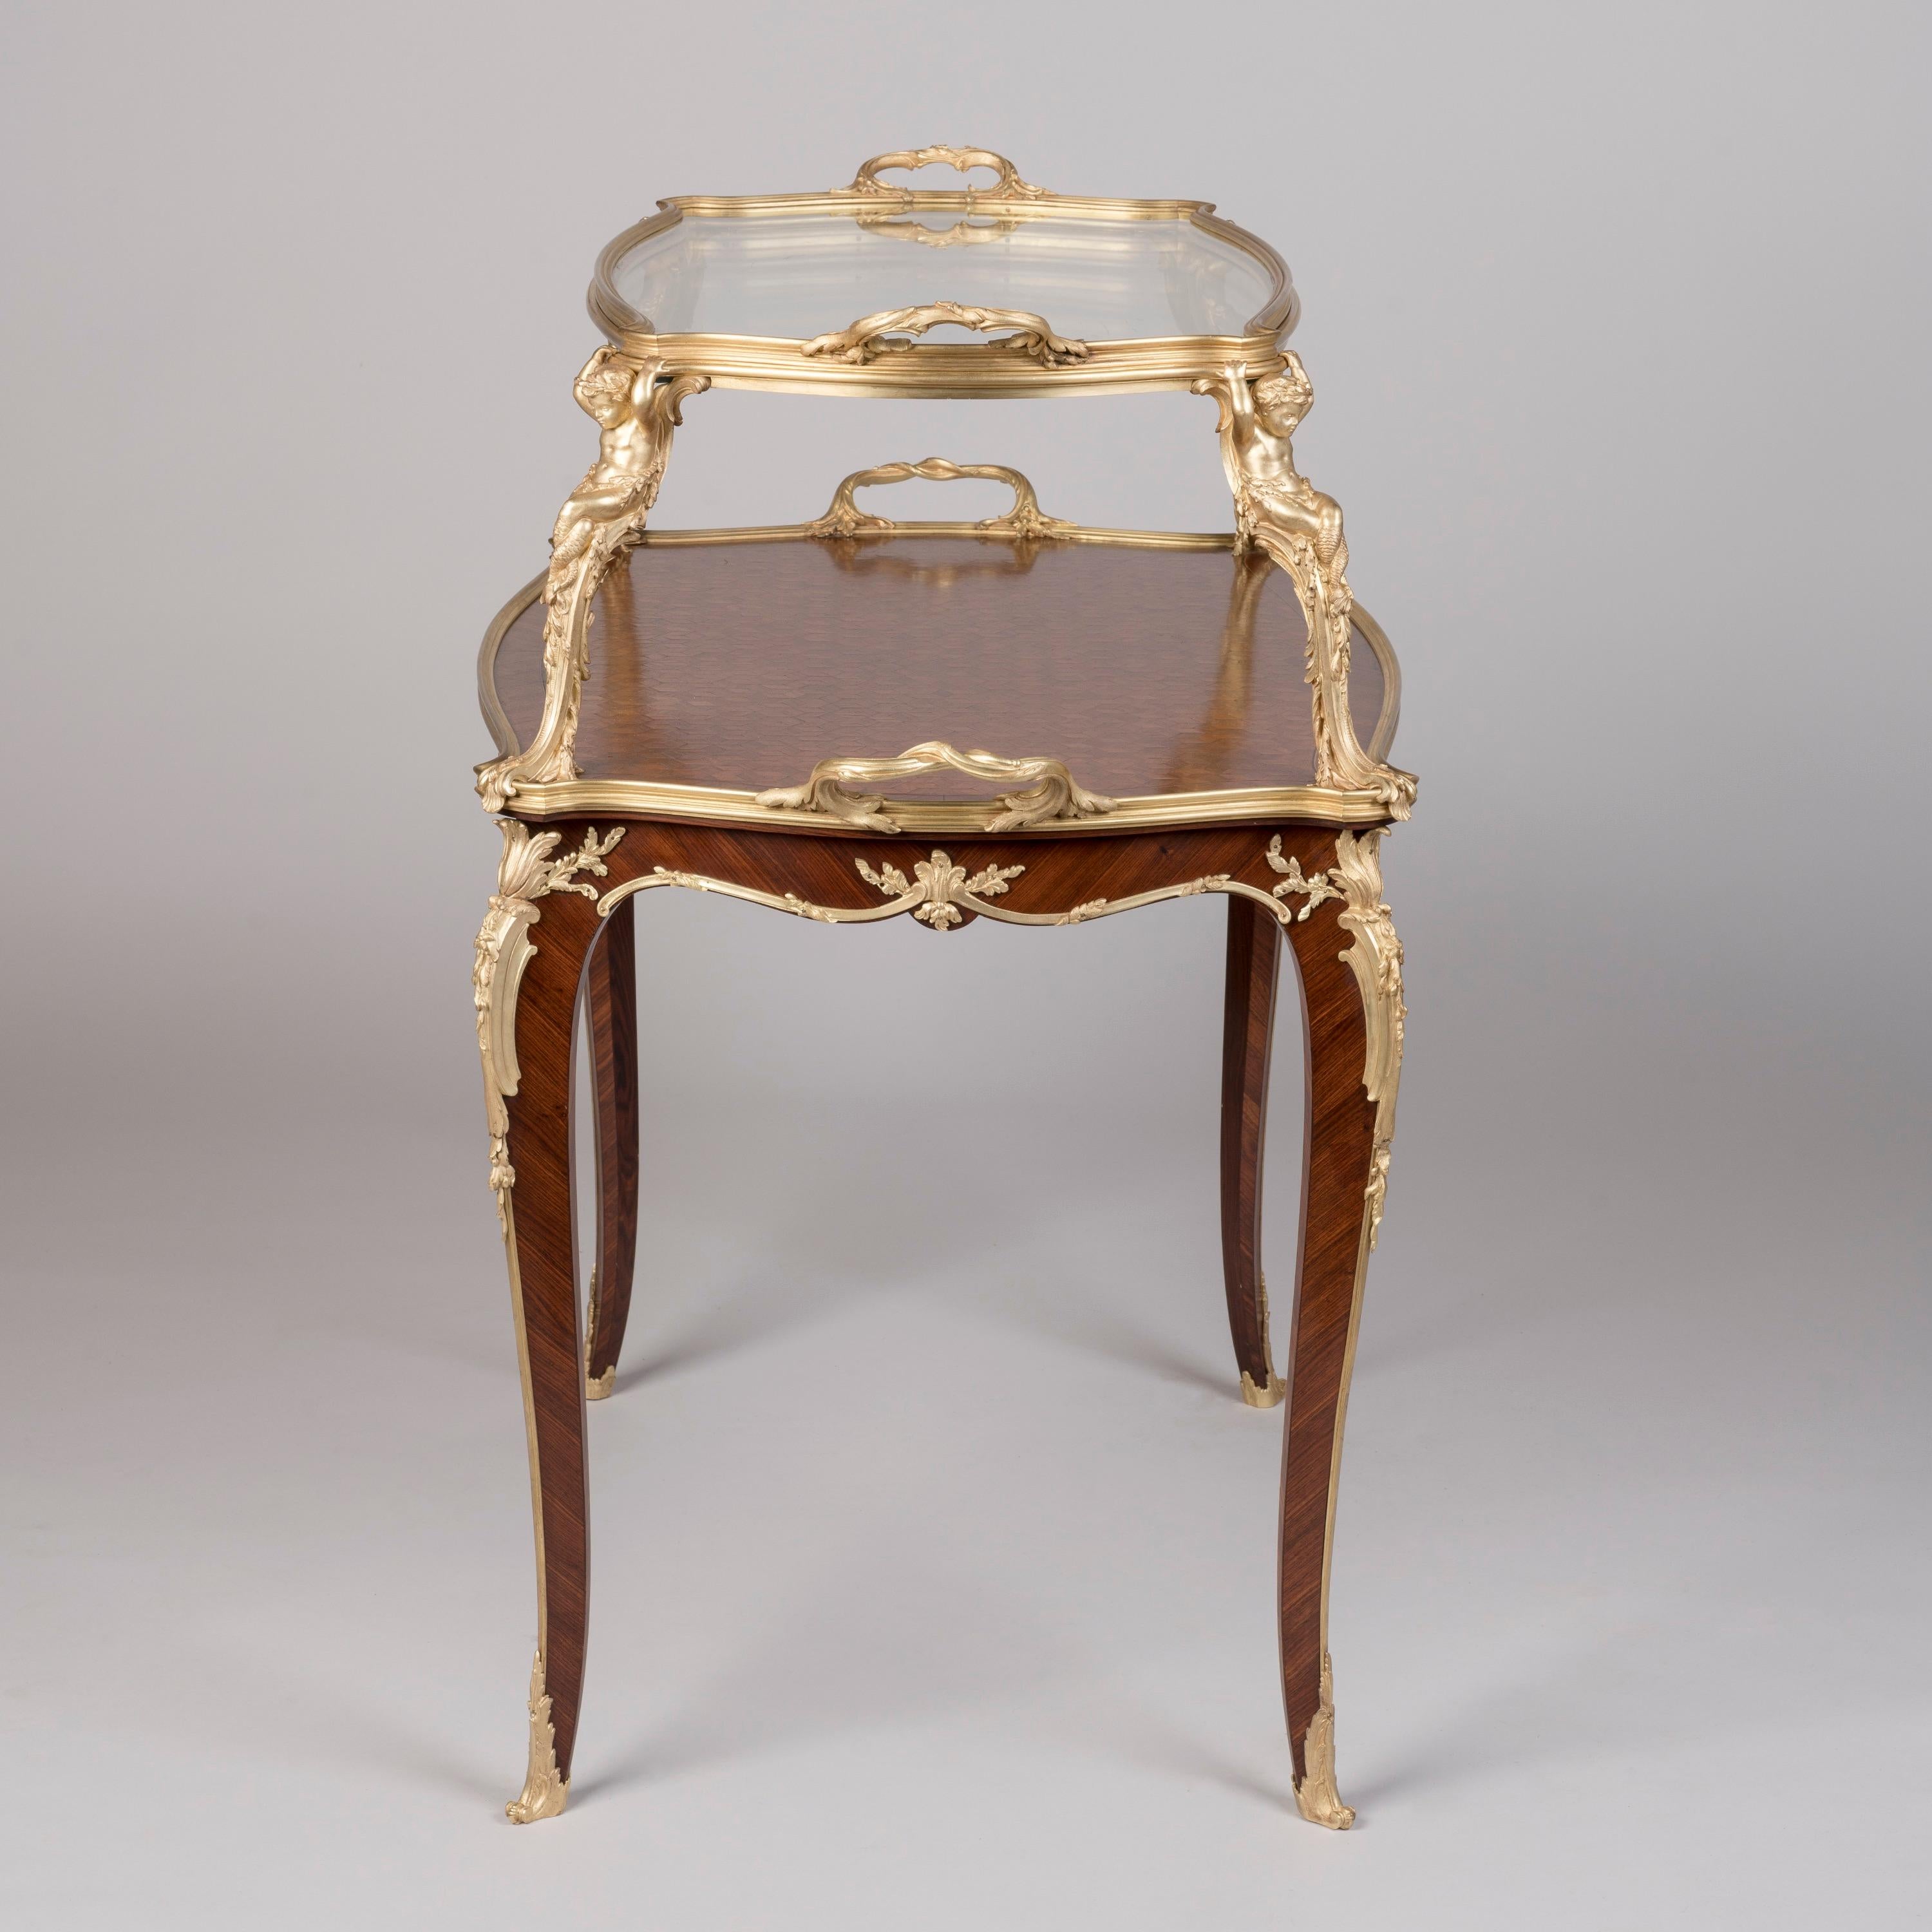 Exceptional 19th Century Kingwood and Ormolu Tray Top Table by François Linke In Good Condition For Sale In London, GB